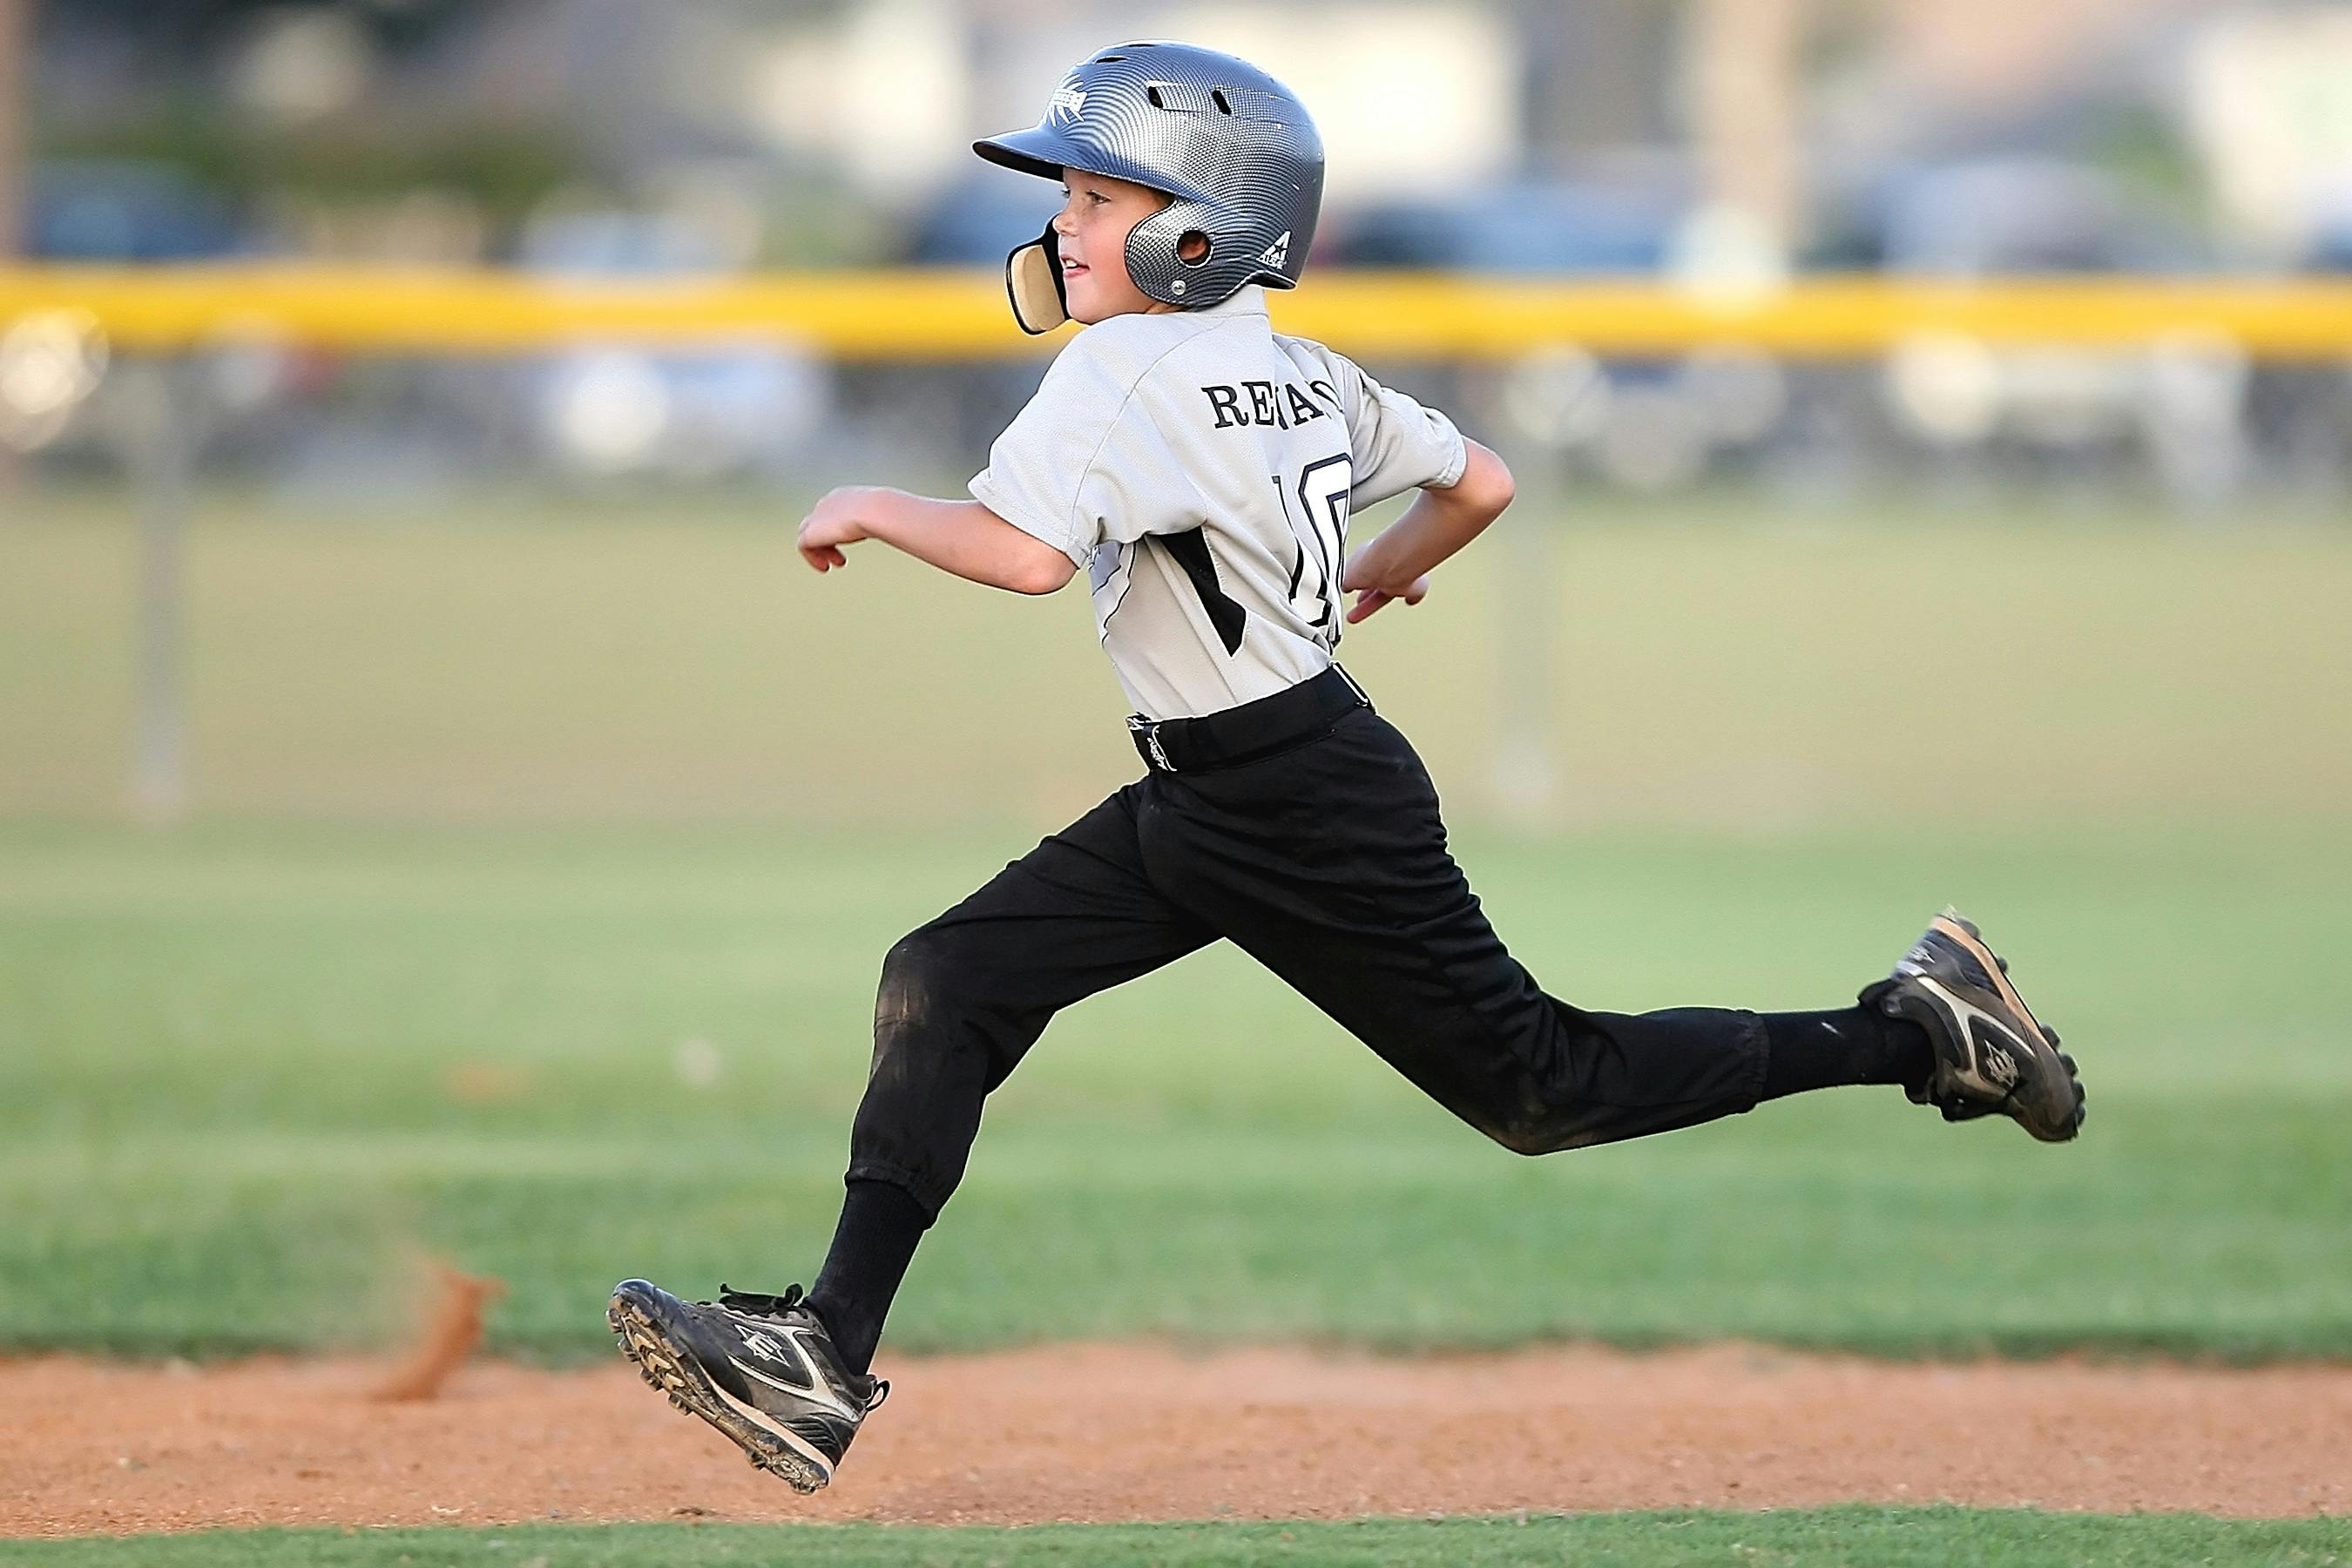 A young baseball player running in the baseball field. | Photo: Pexels 